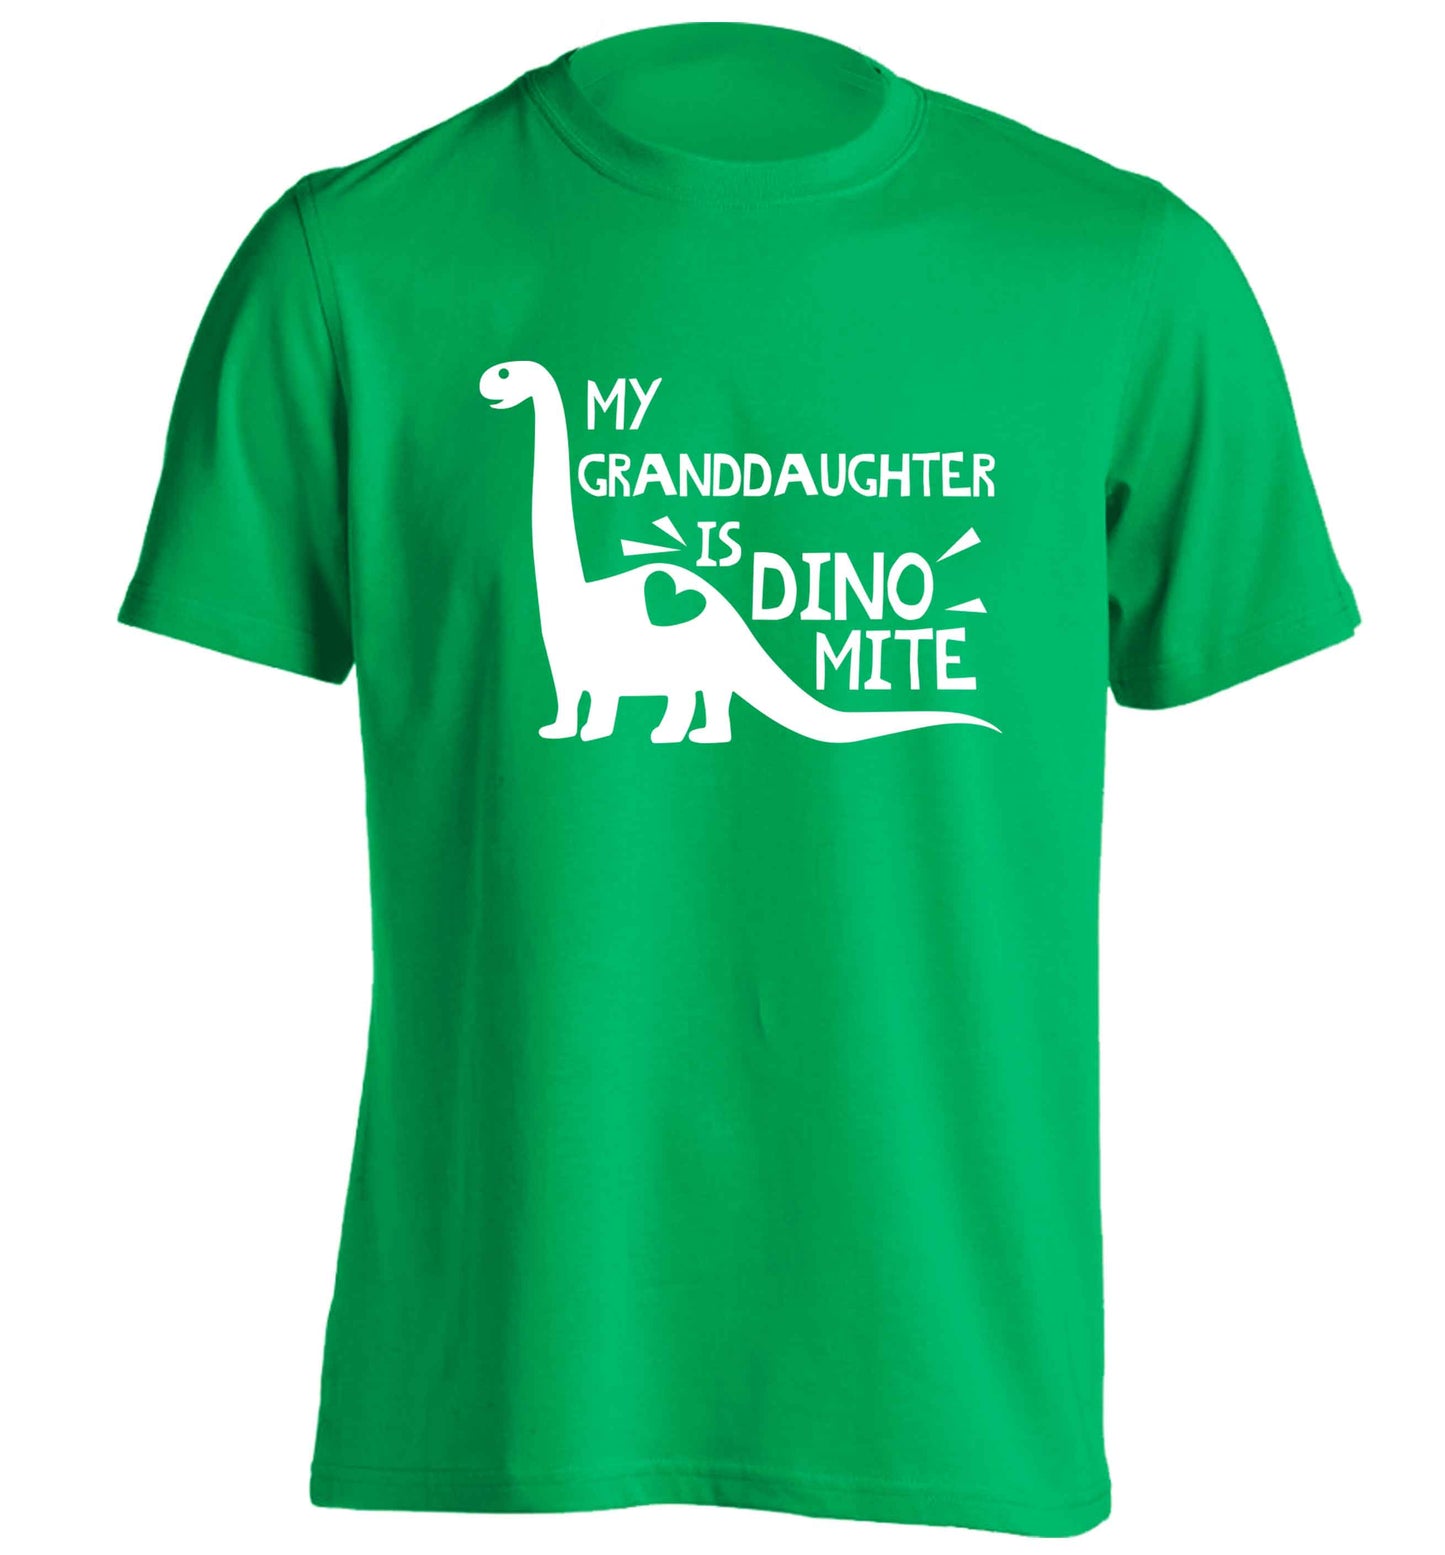 My granddaughter is dinomite! adults unisex green Tshirt 2XL